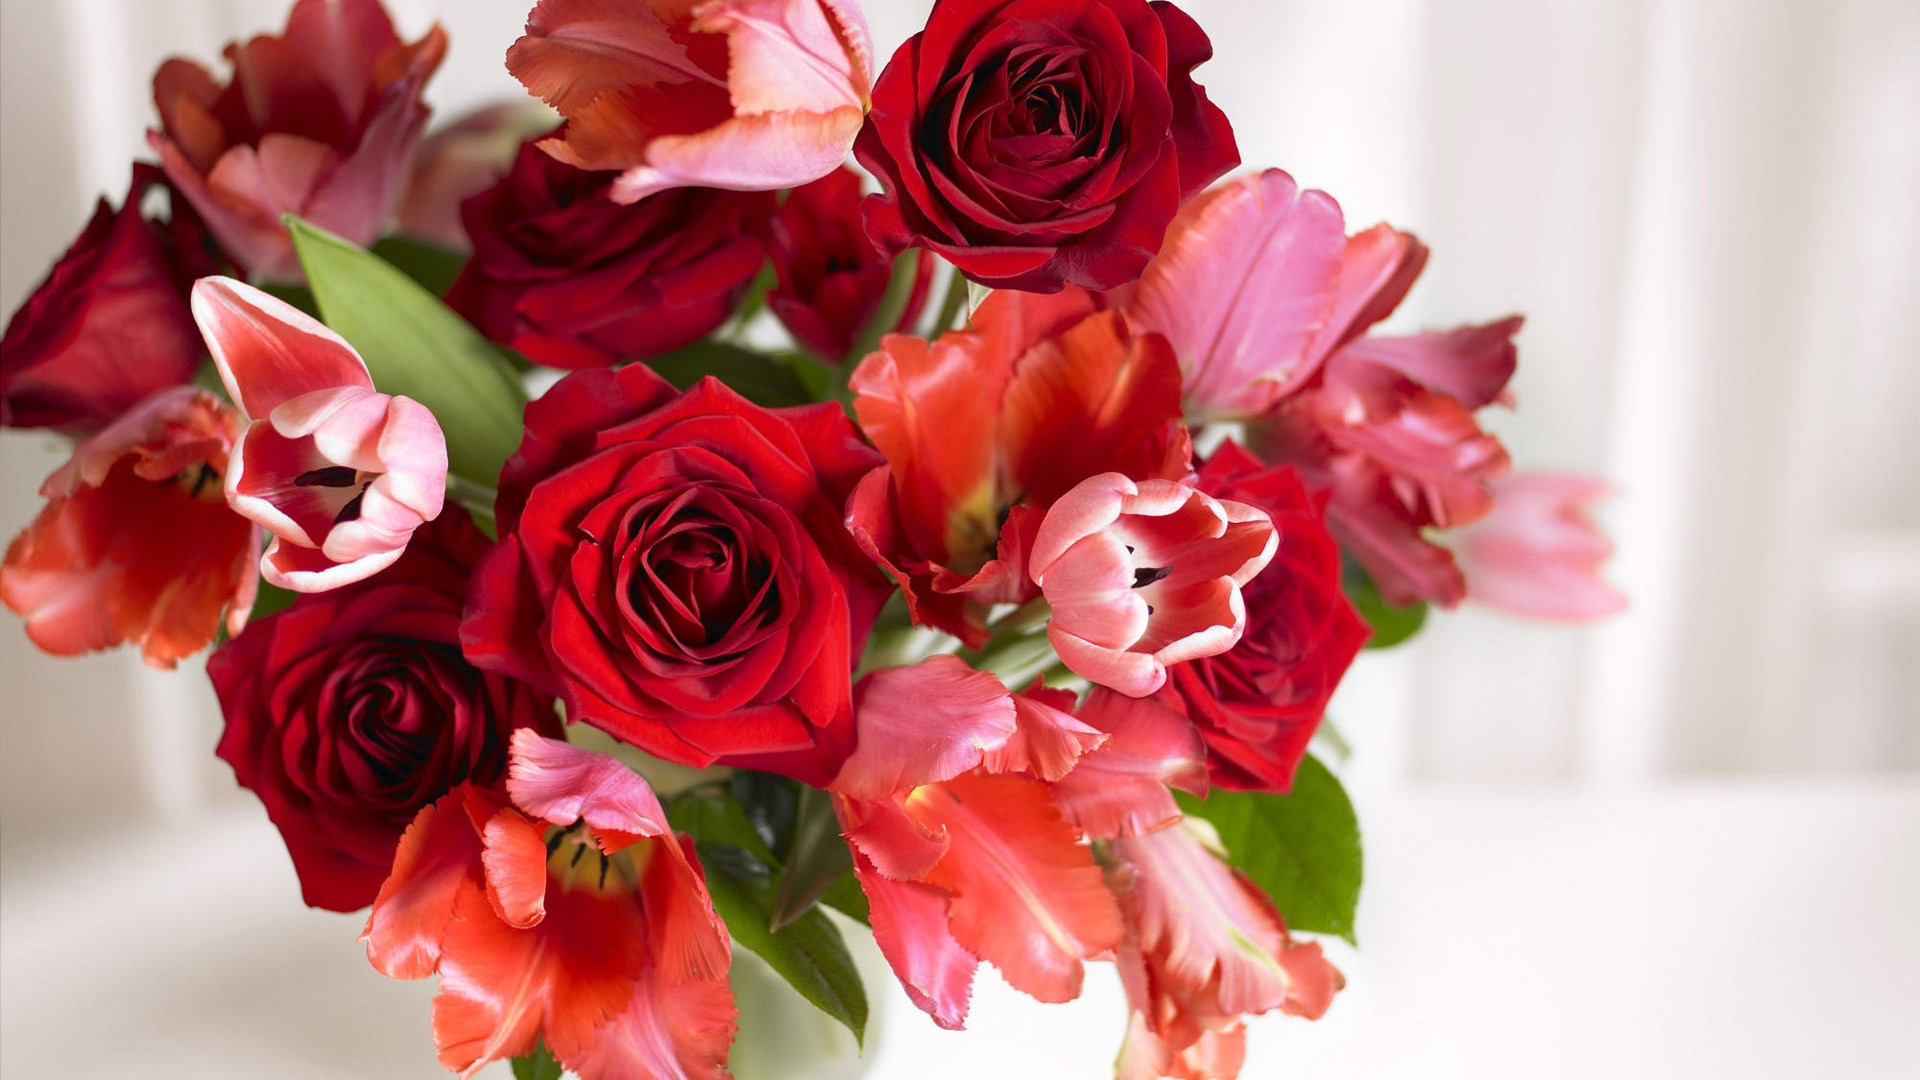 Arrangement of Roses and Tulips for 1920 x 1080 HDTV 1080p resolution